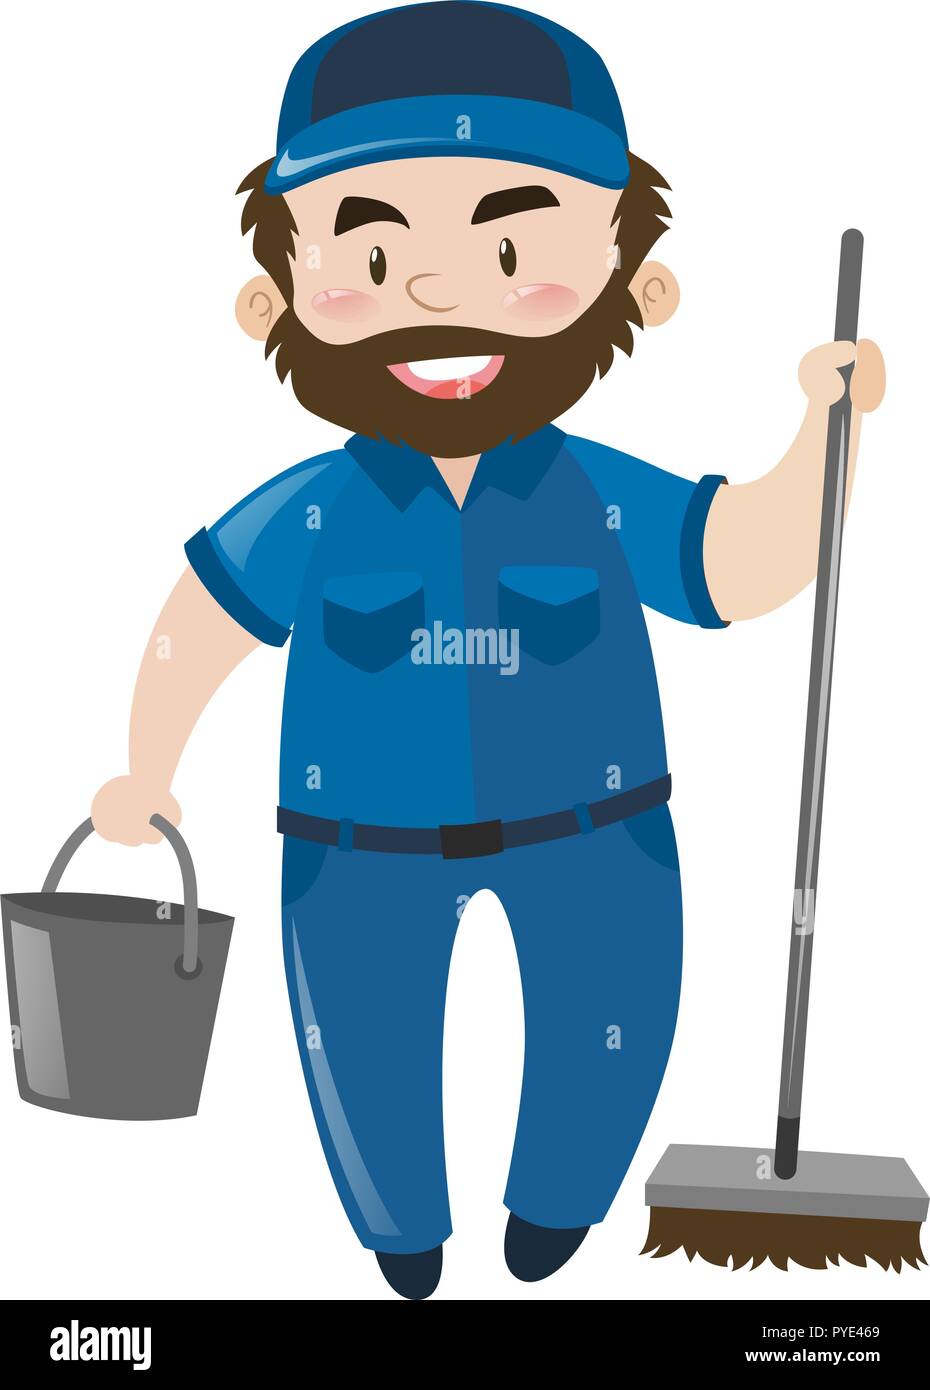 Janitor male Stock Vector Images - Alamy